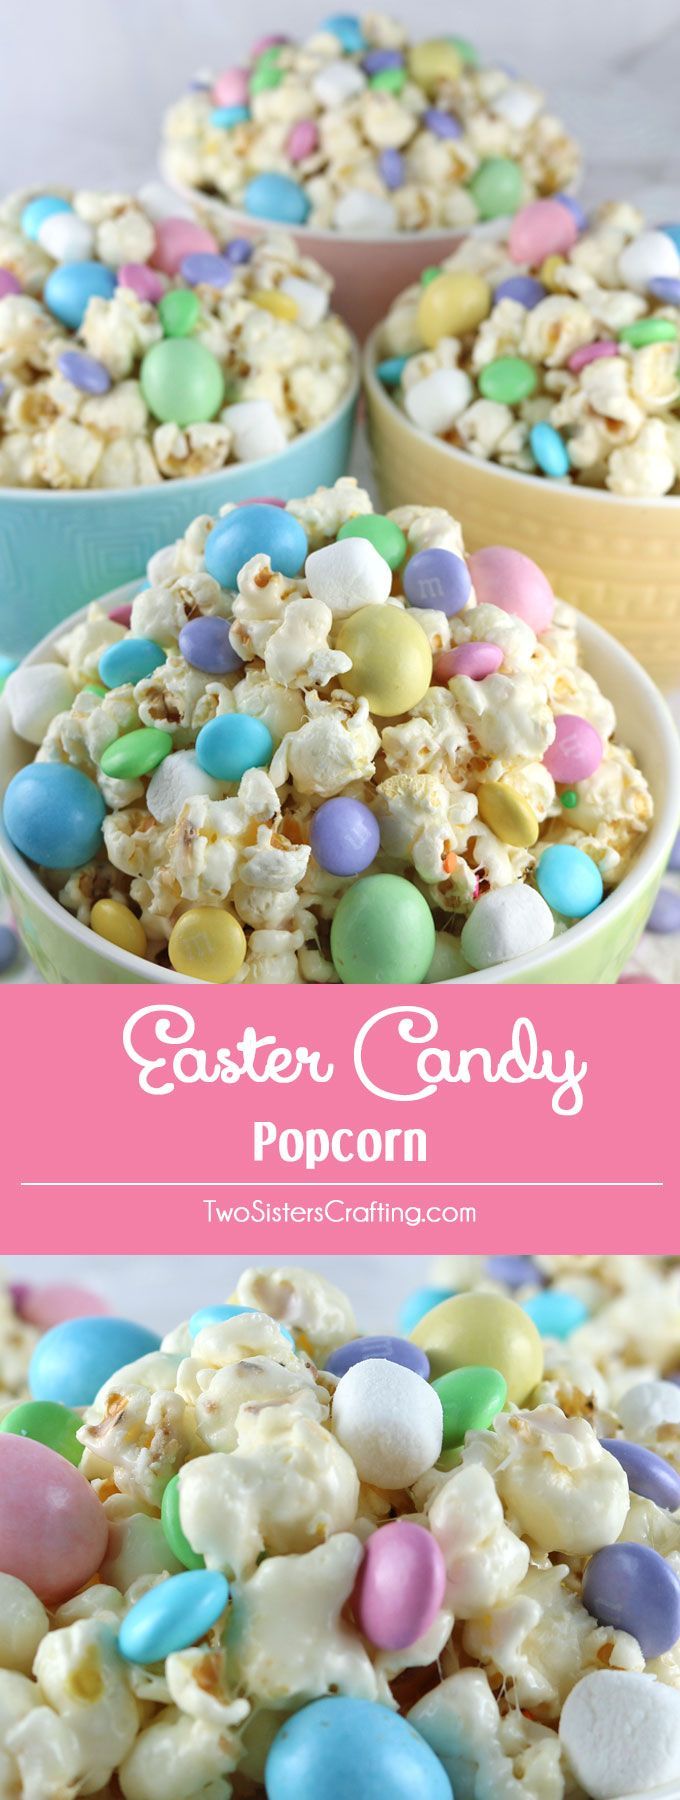 Celebrate with our Easter Candy Popcorn – a fun Easter Dessert that is both sweet and salty and chock full of Easter Candy. This